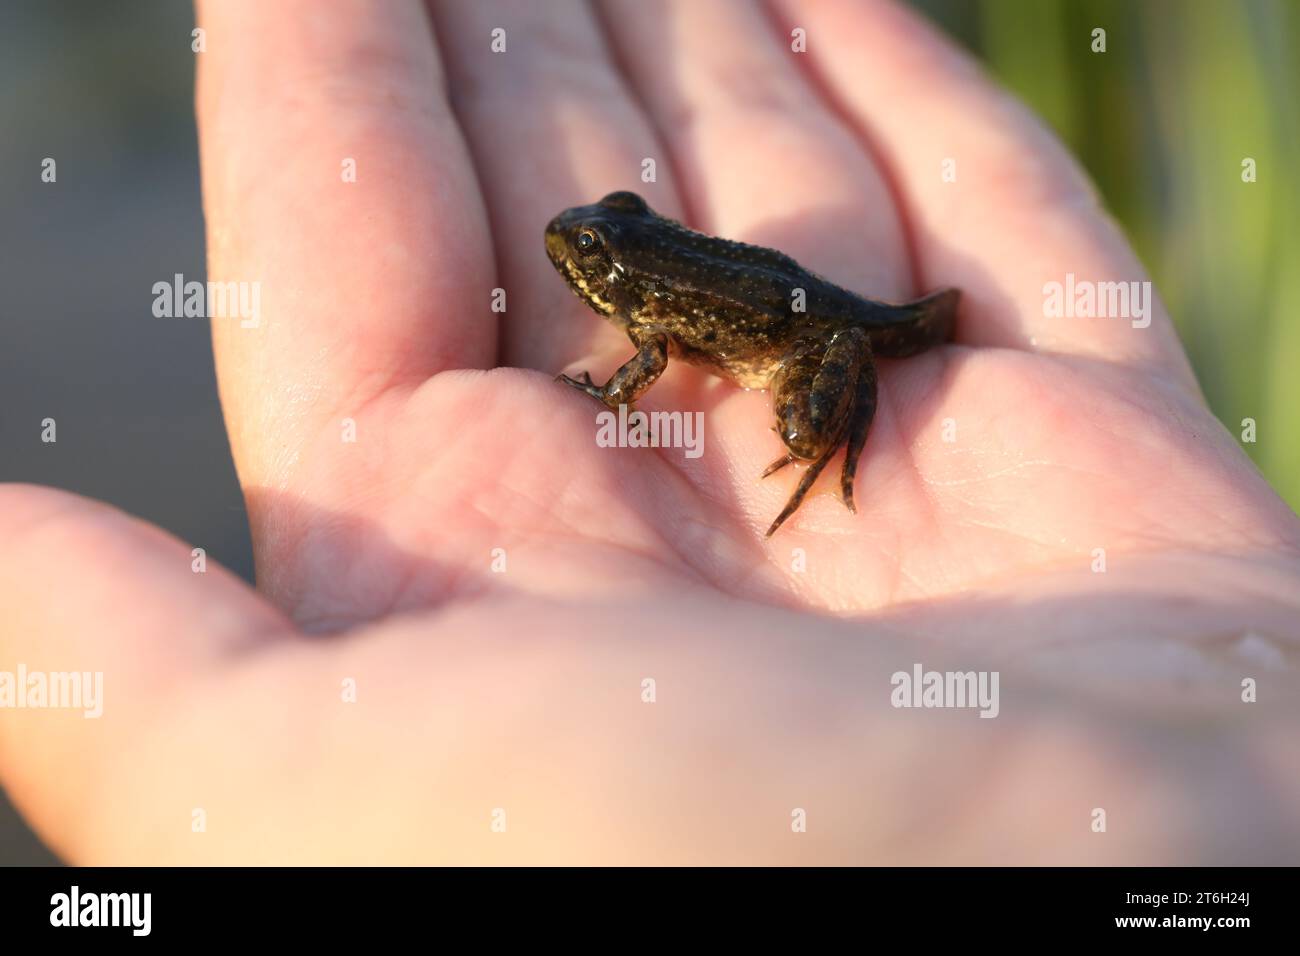 Green edible frog in the water with grass Stock Photo